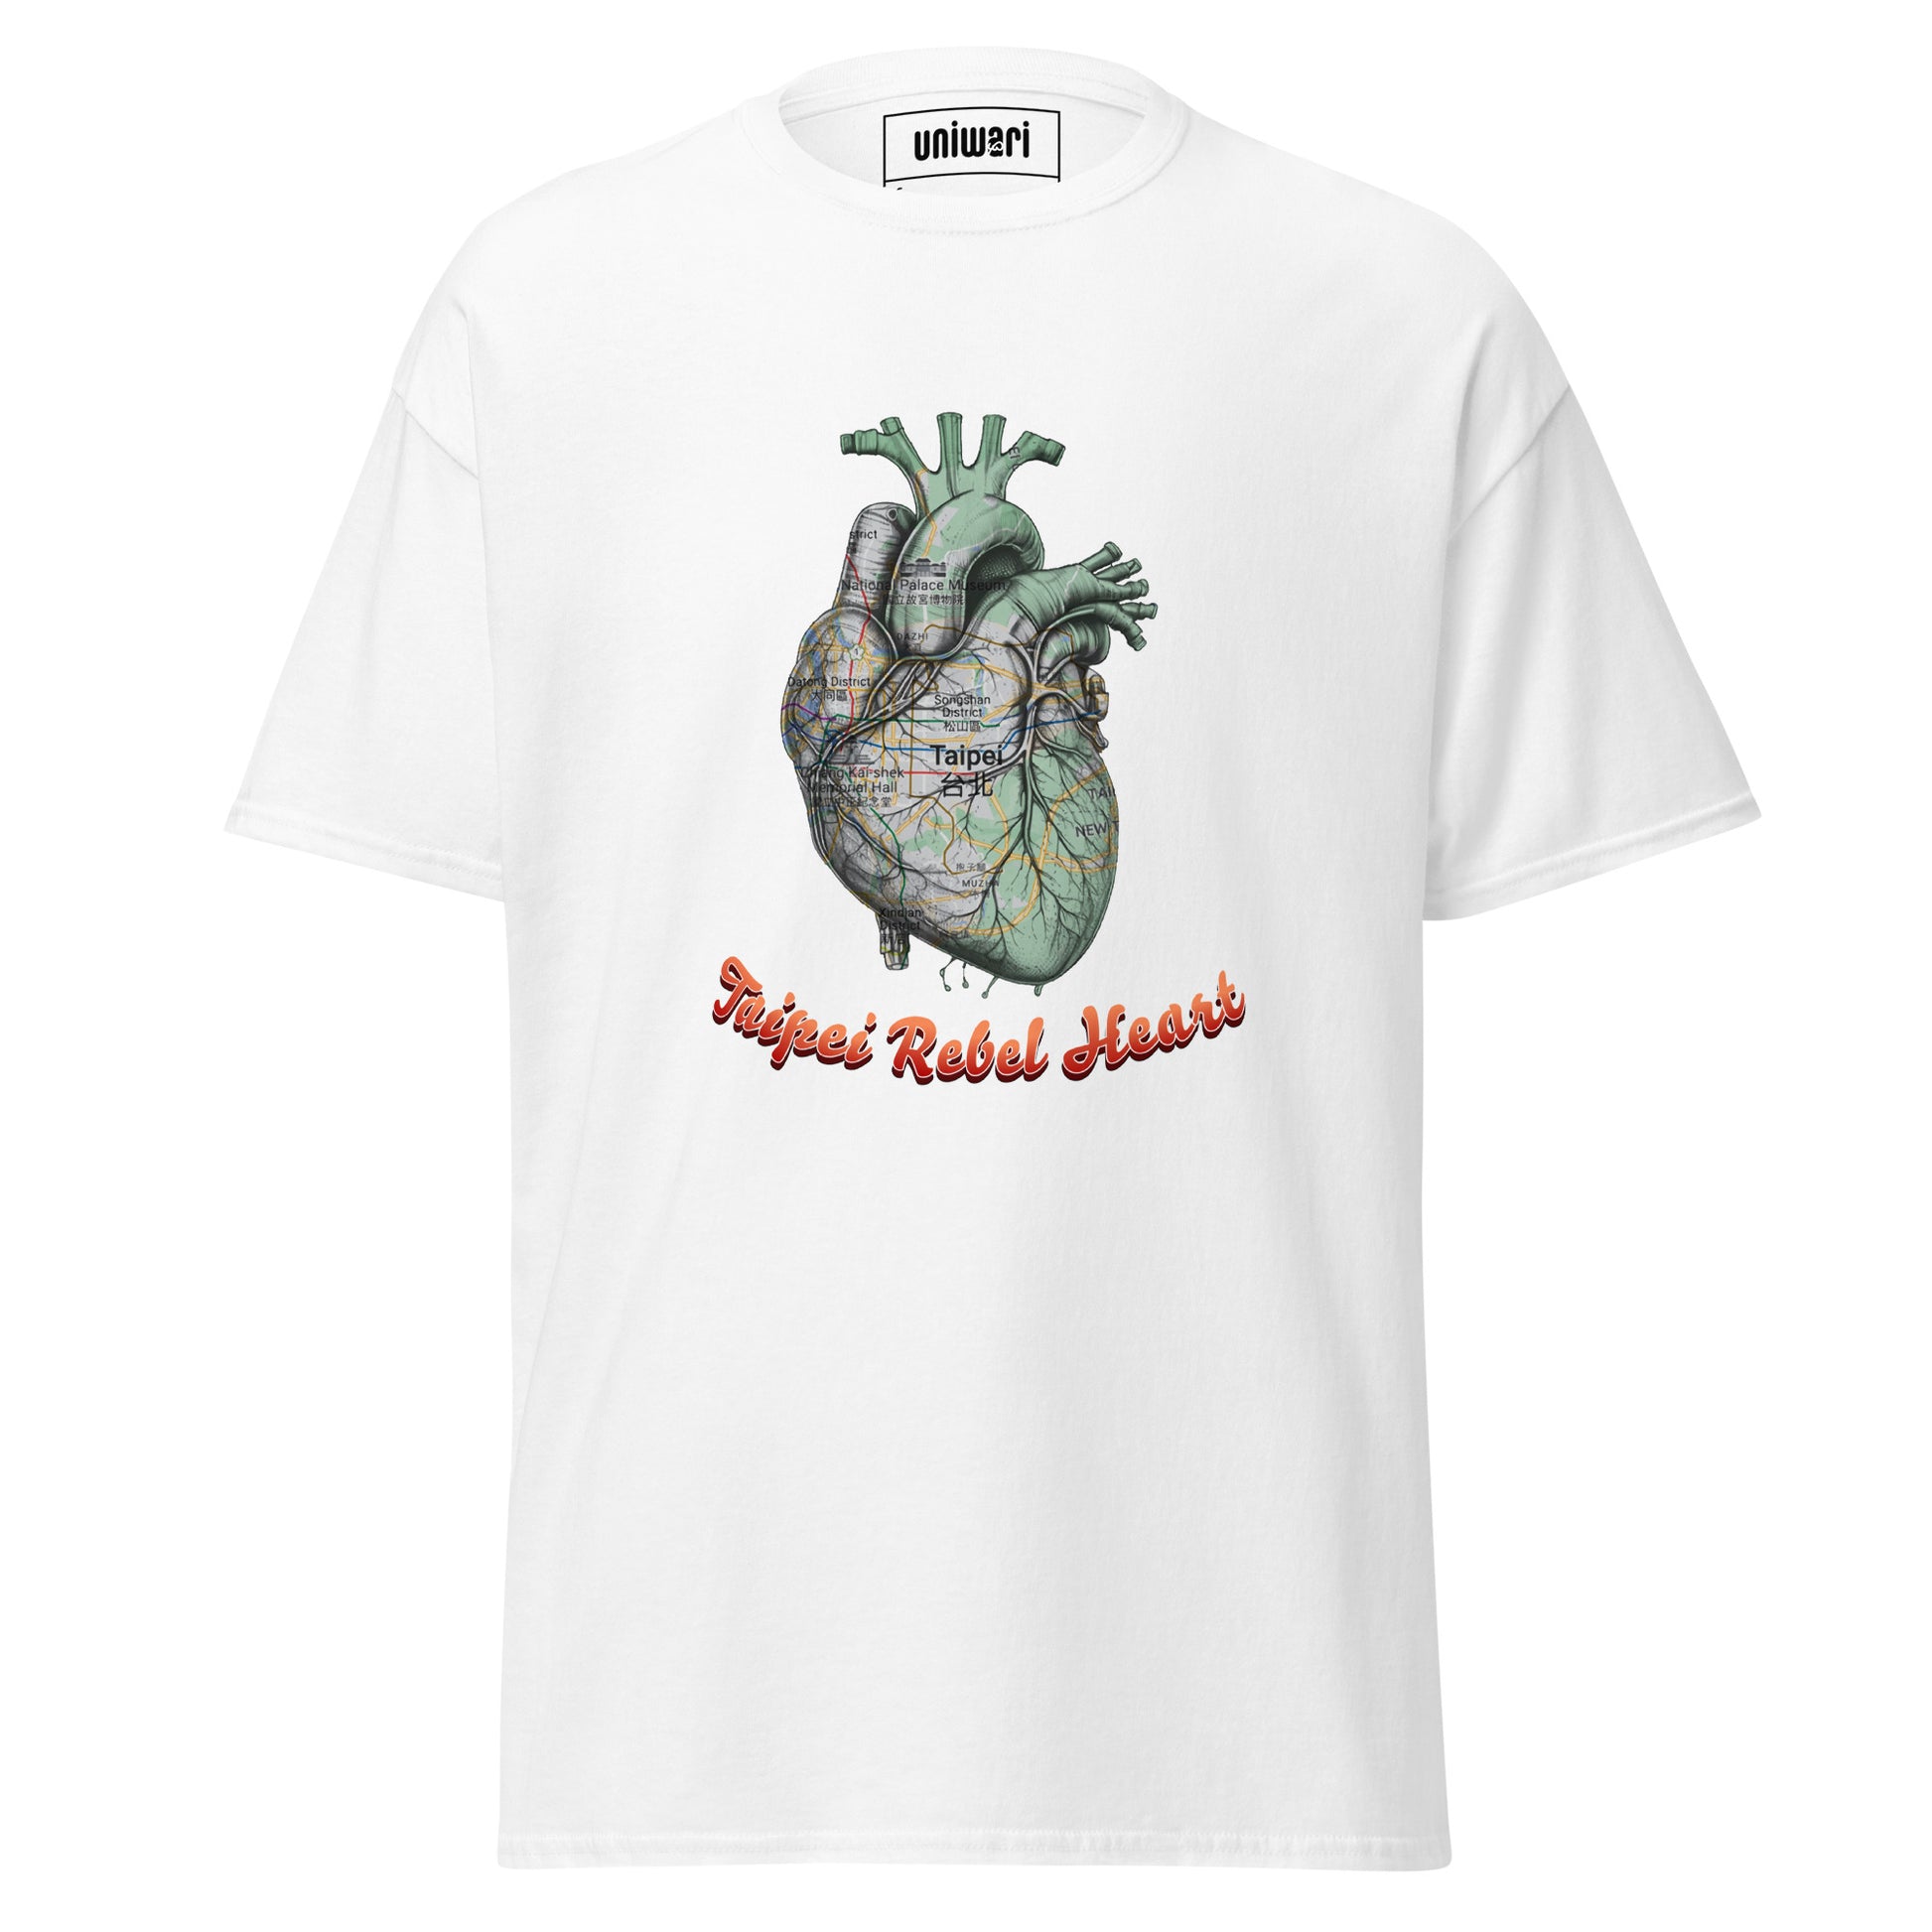 White High Quality Tee - Front Design with a Heart Shaped Map of Taipei and a Phrase "Taipei Rebel Heart" print